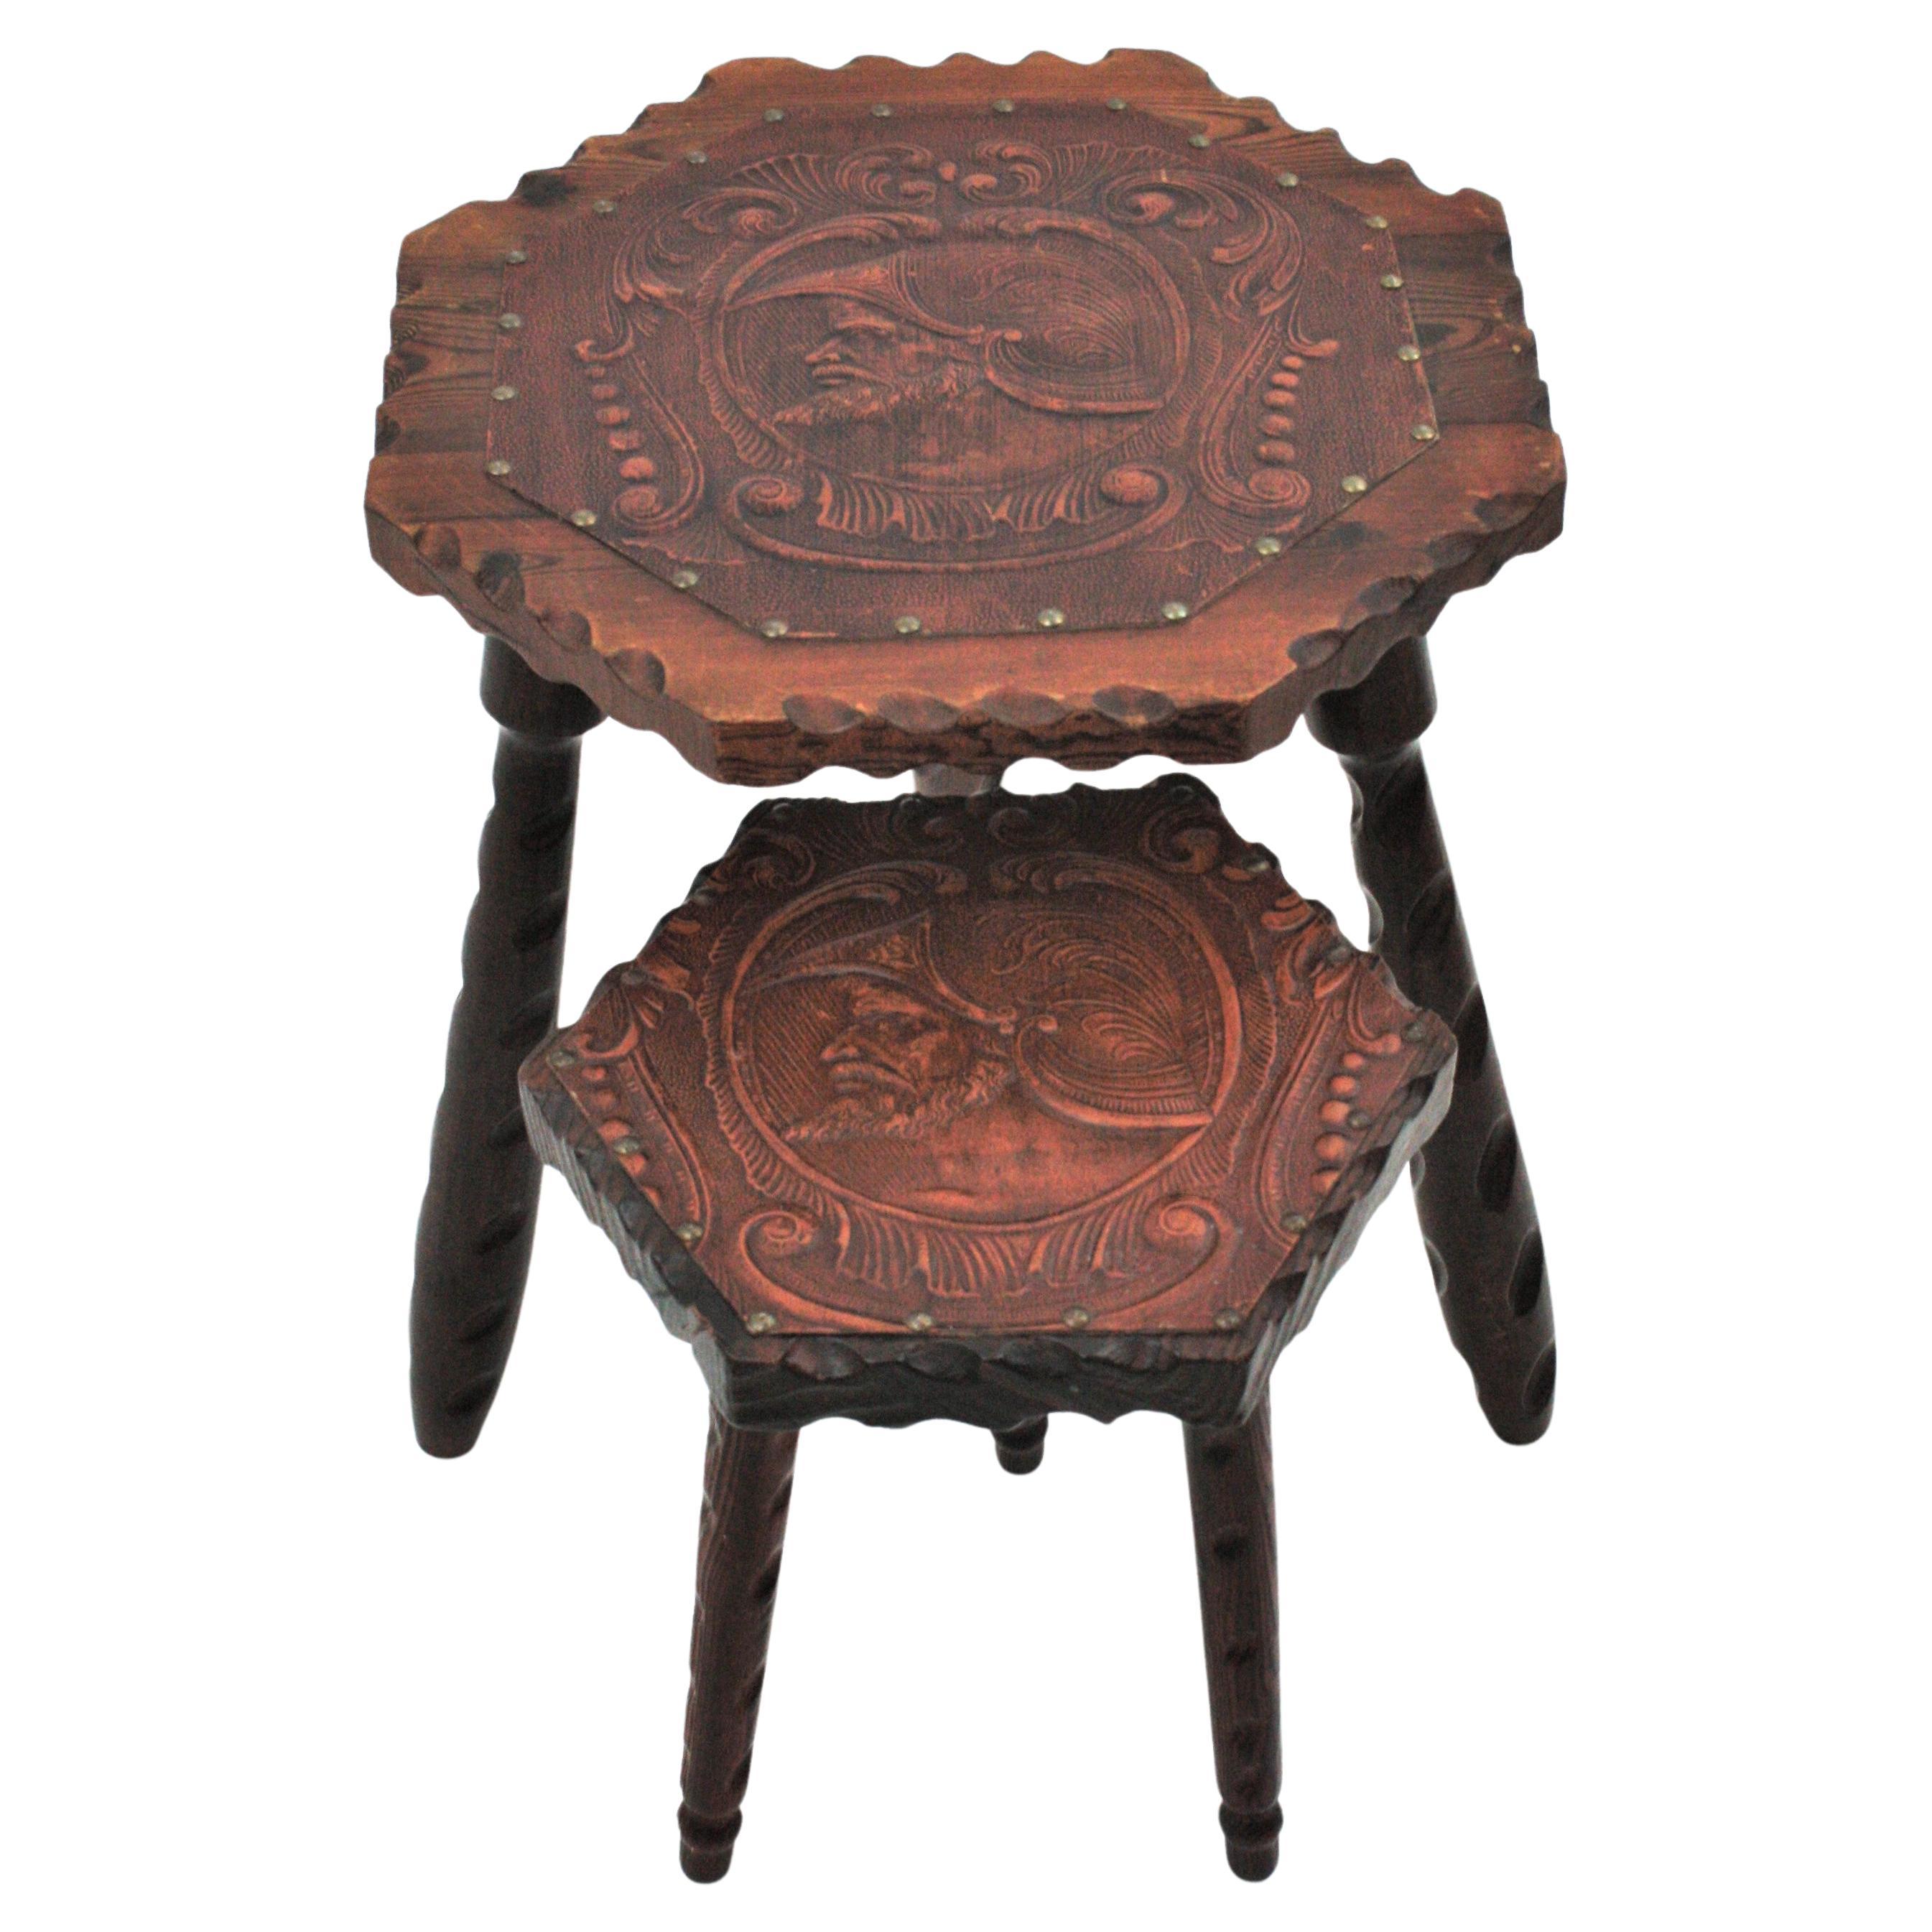 Two Spanish Colonial Hexagonal Tables in Carved Wood & Repousse Leather, 1940s